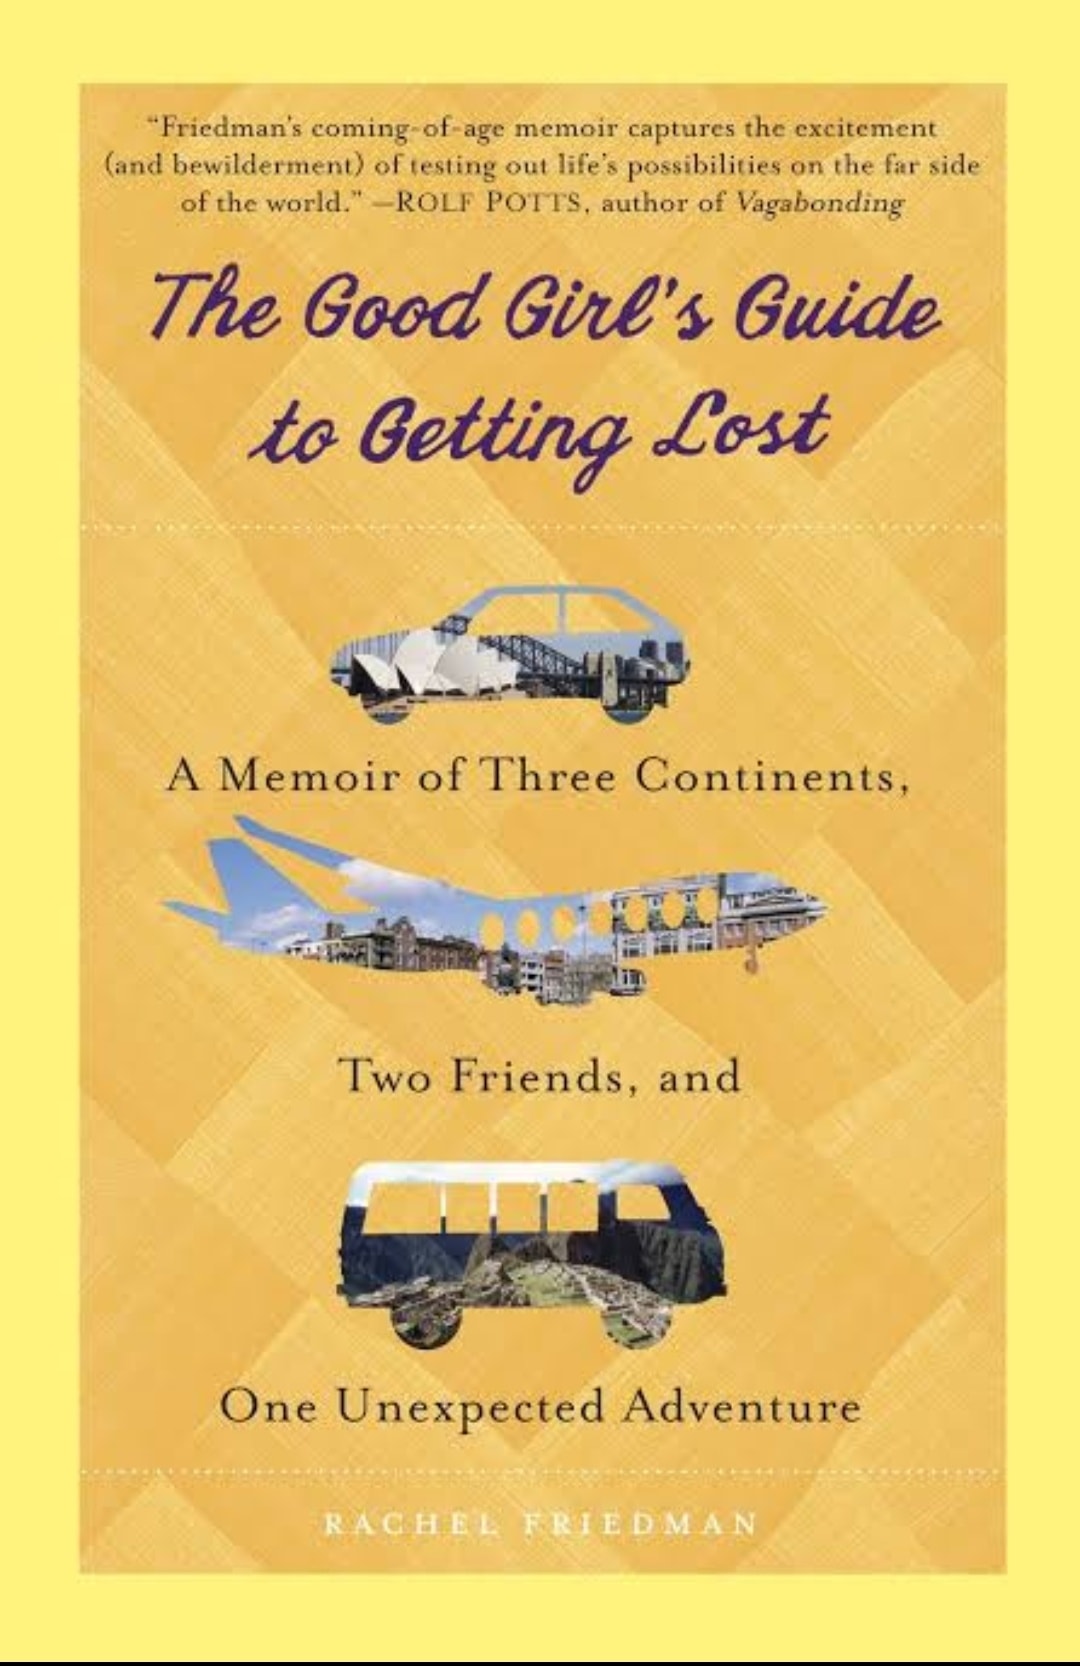 The good girl’s guide to getting lost